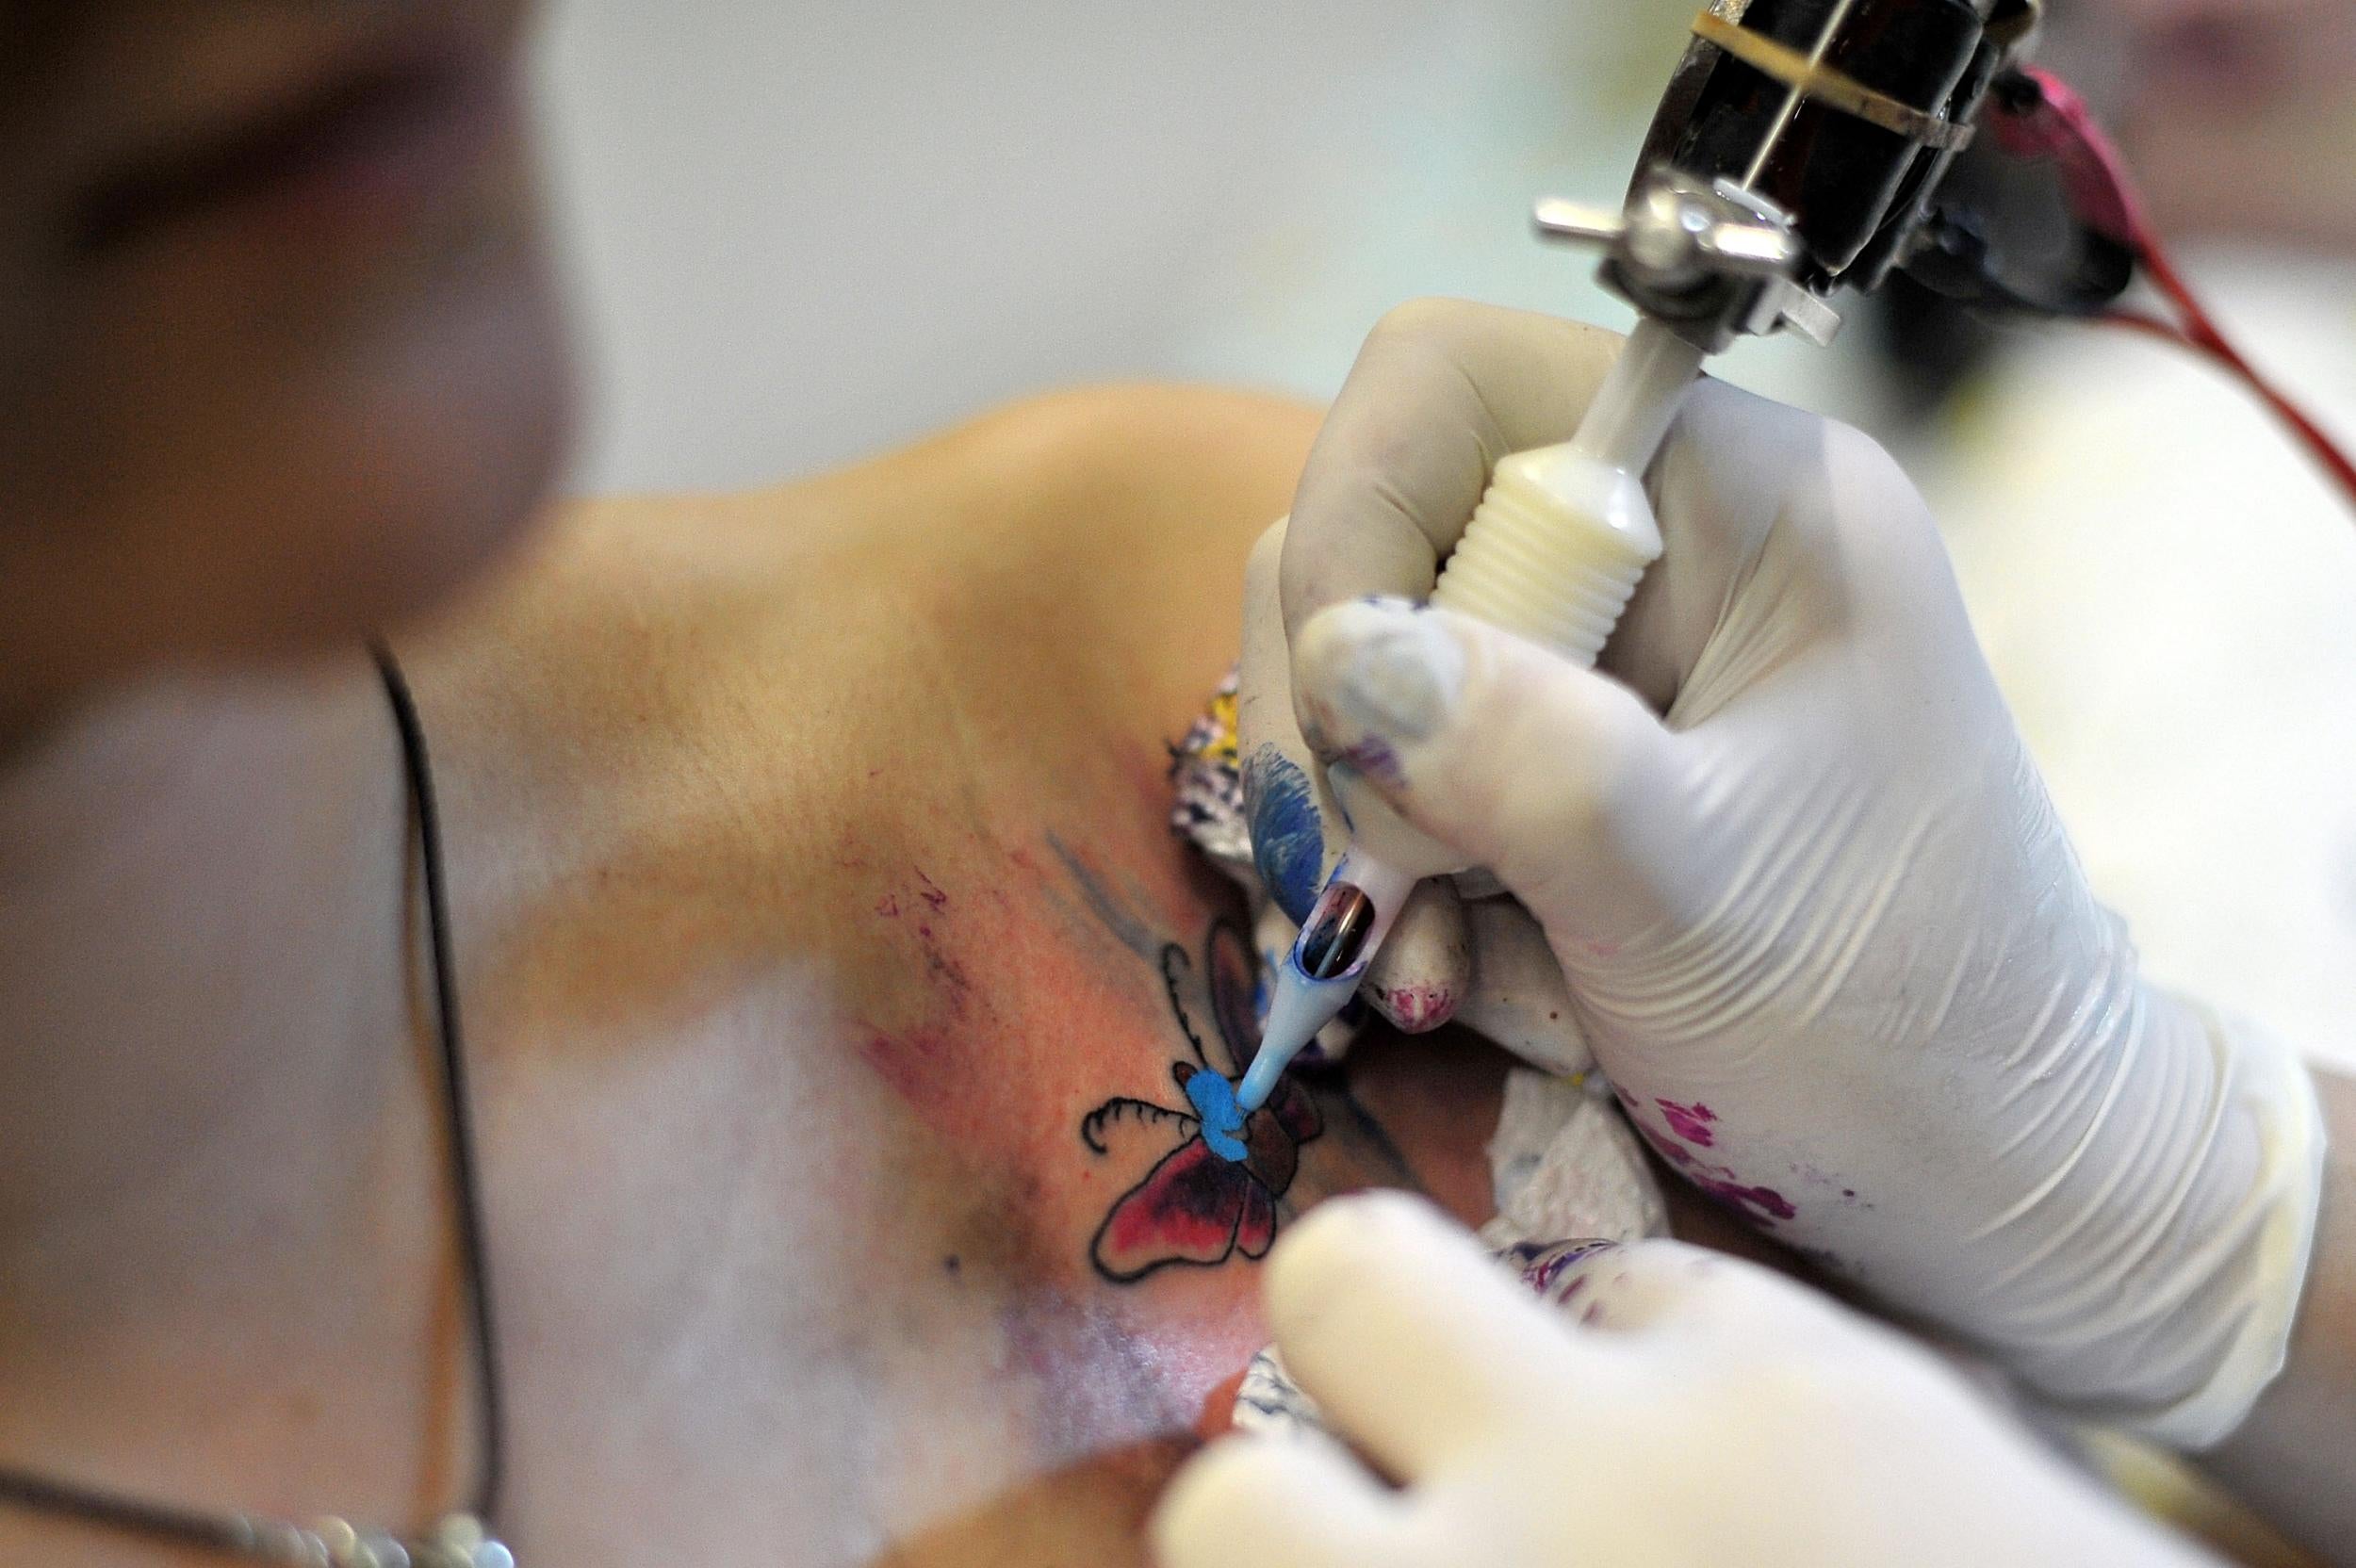 It is against New York state law to tattoo people under the age of 18